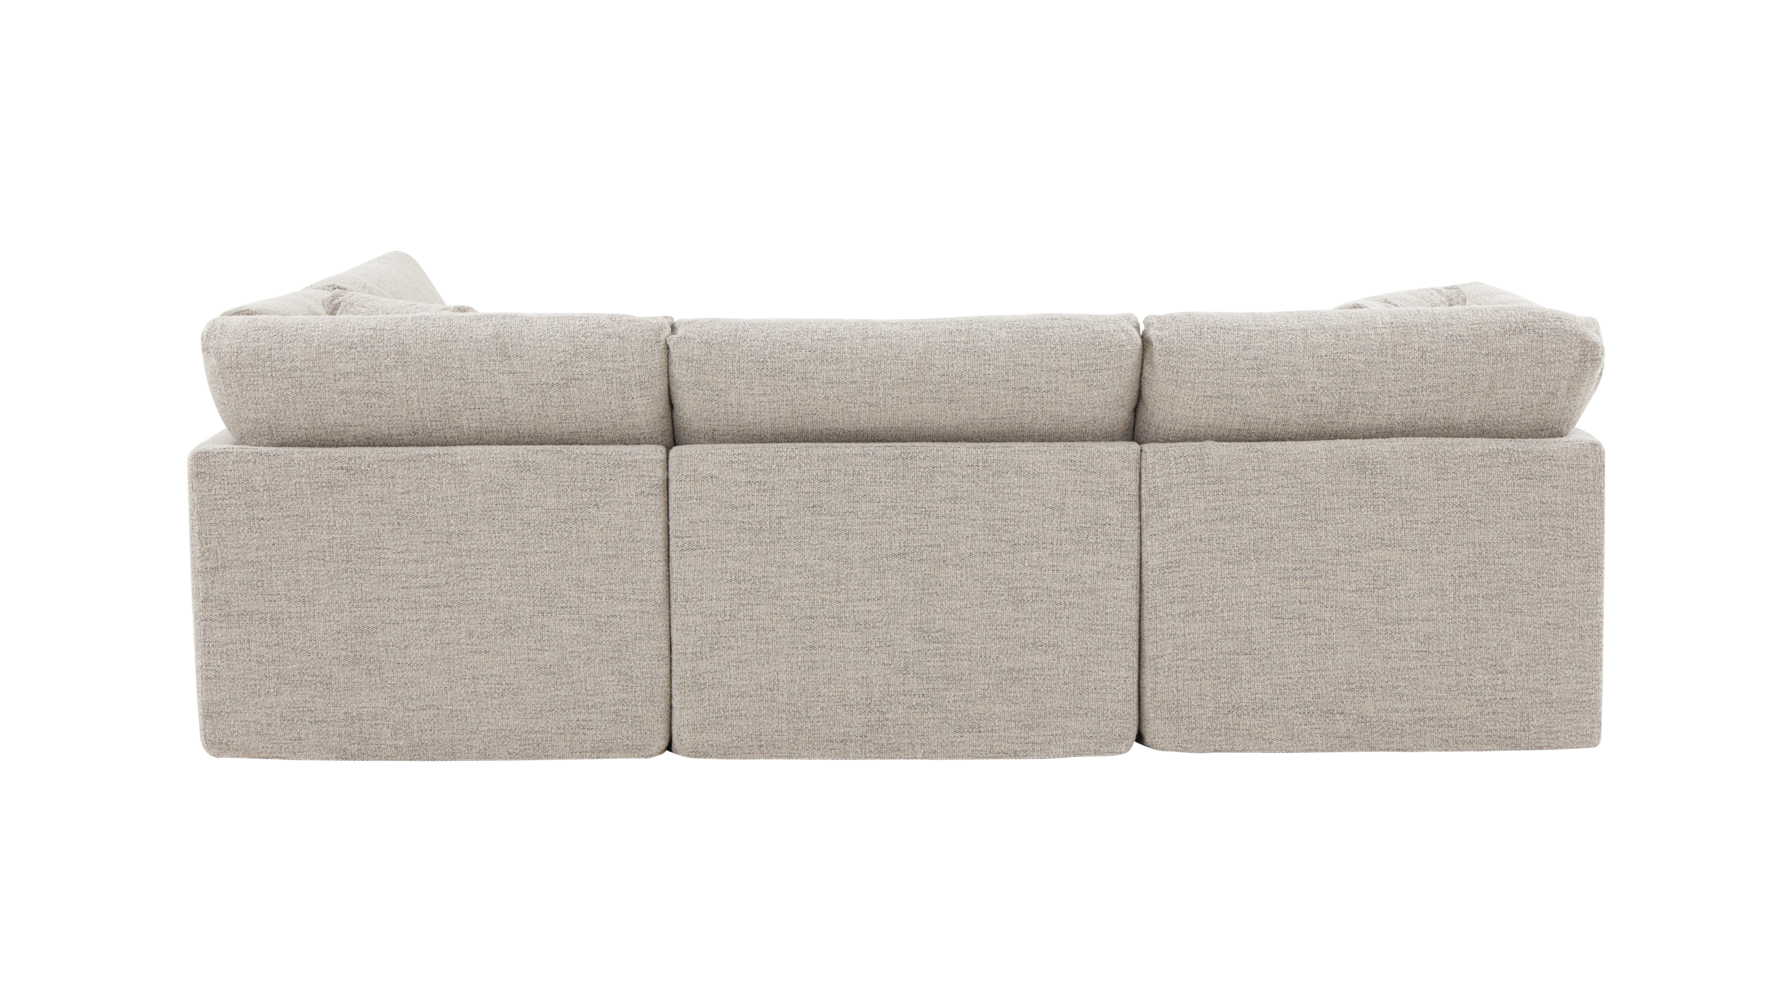 Get Together™ 5-Piece Modular Sectional, Standard, Oatmeal - Image 6